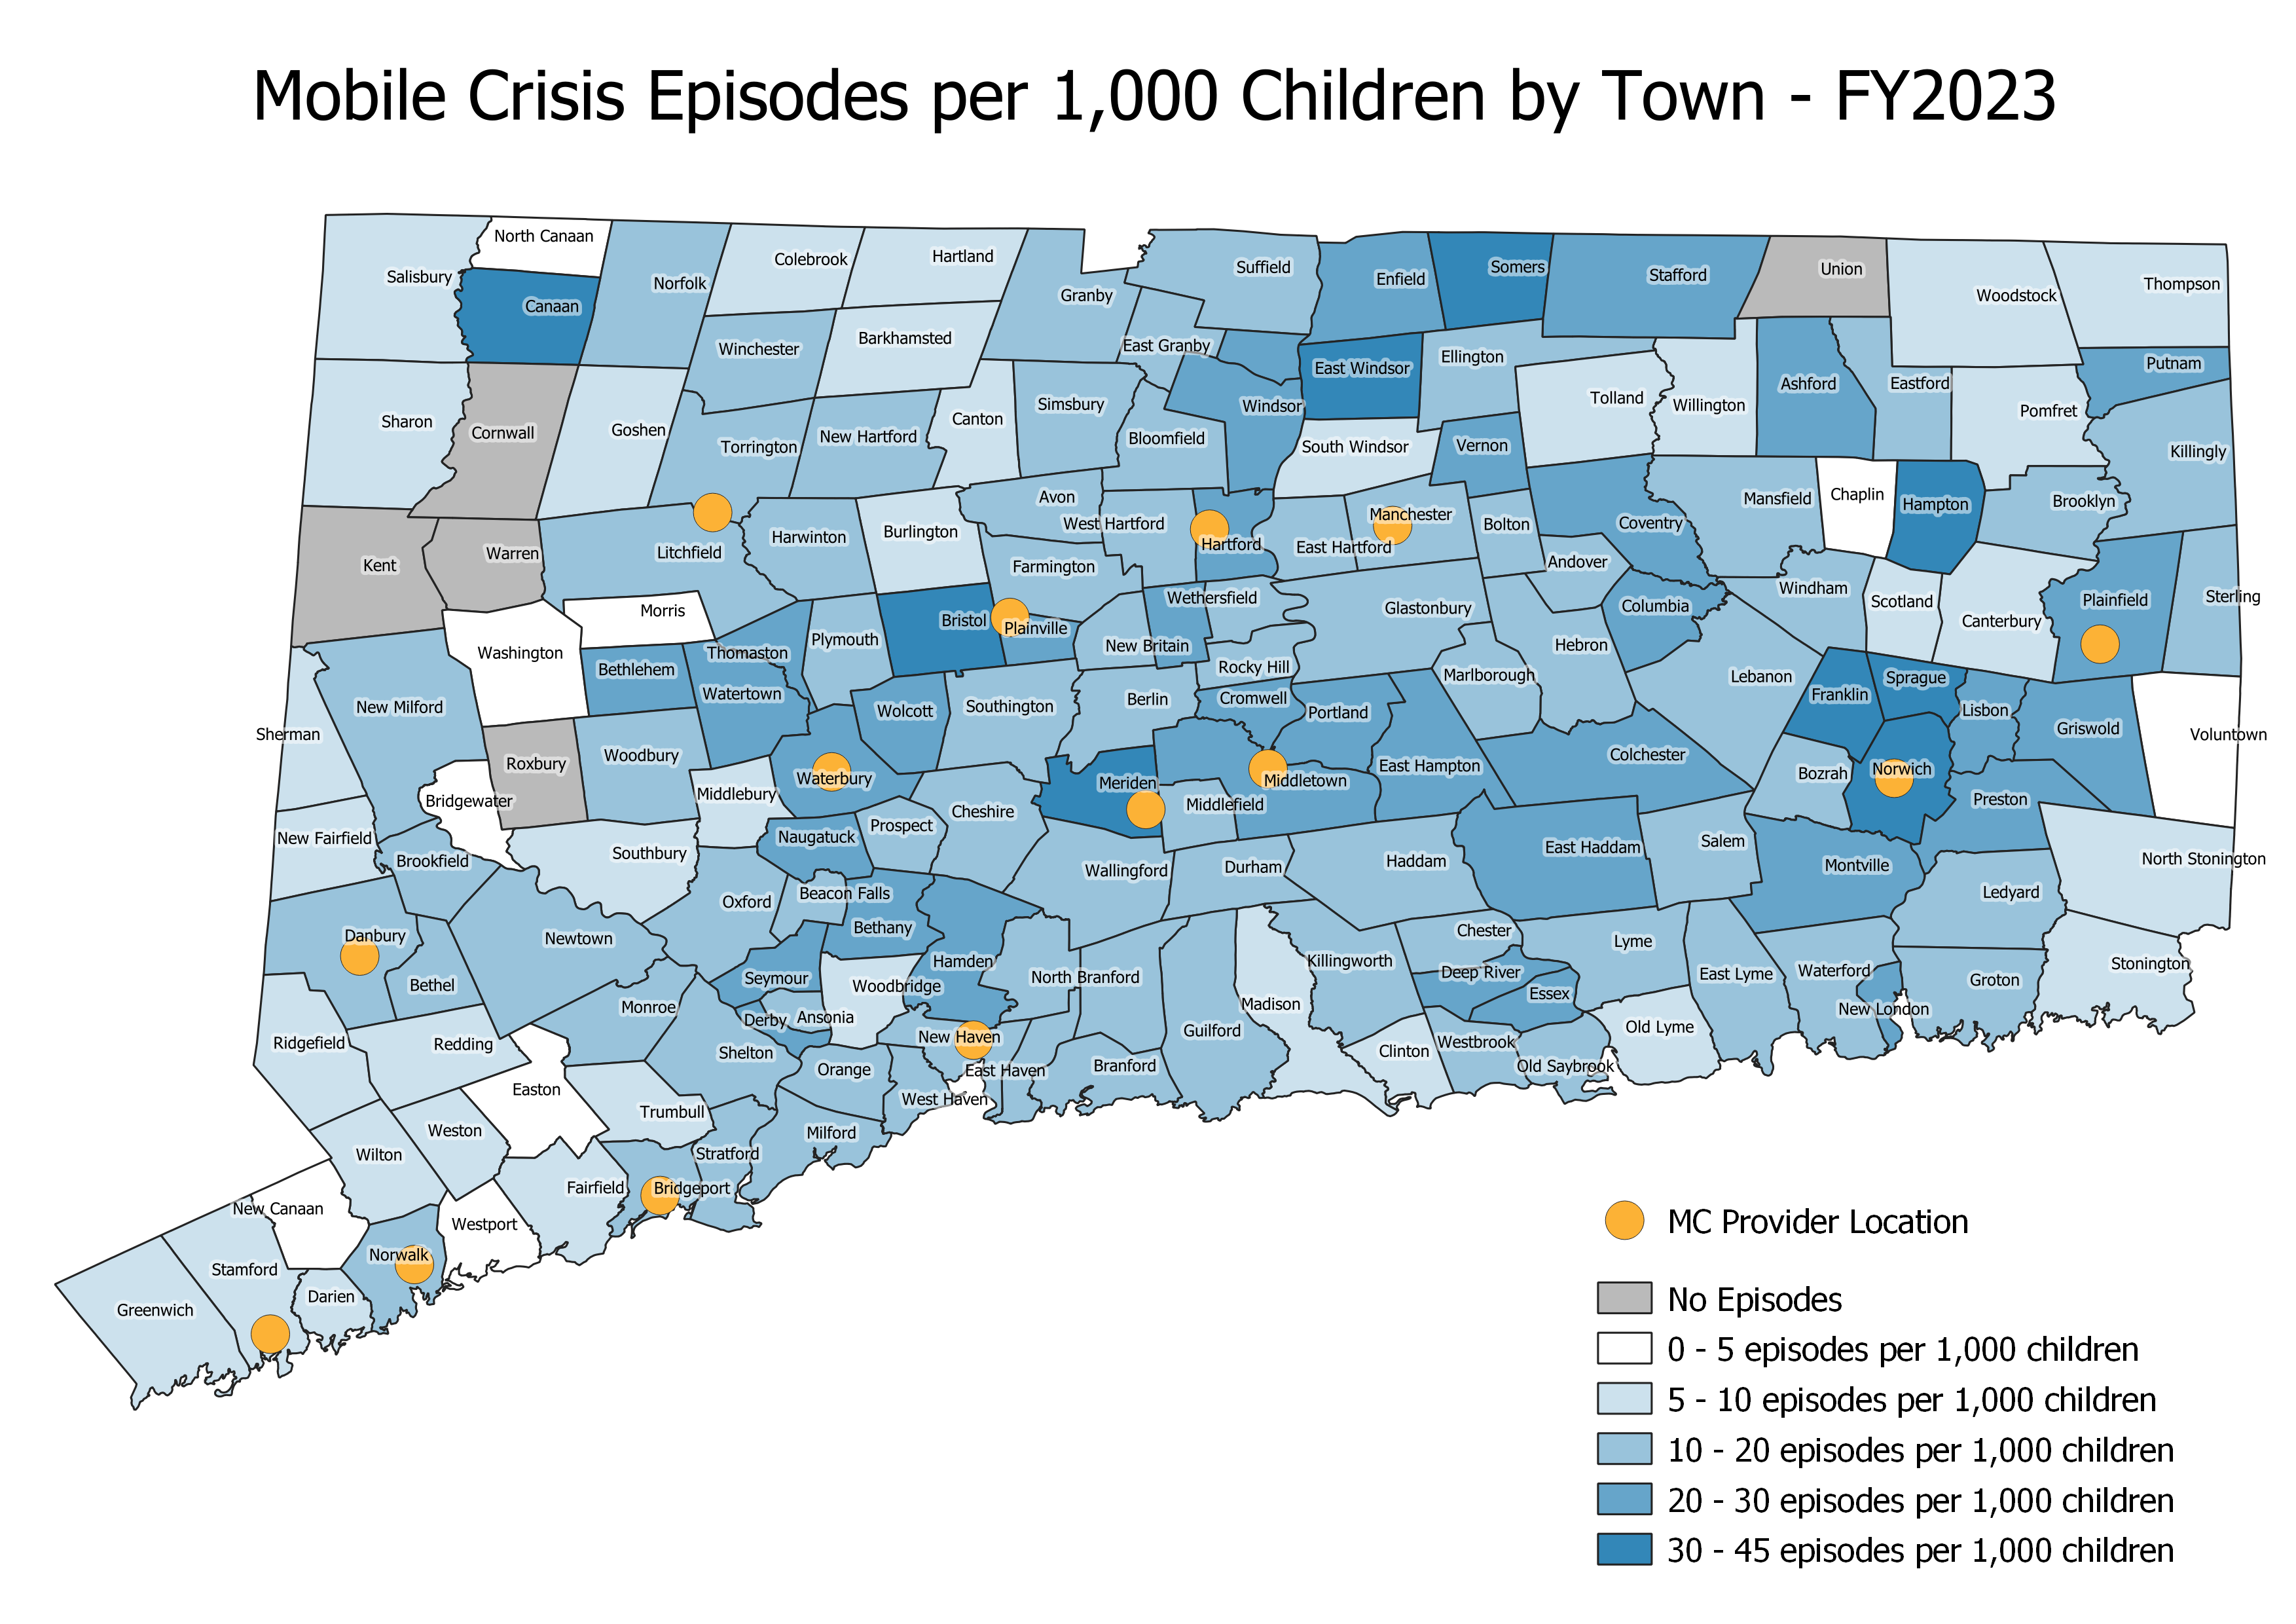 Map of Connecticut showing rate of Mobile Crisis episodes by town in FY 2023. View full map in report.